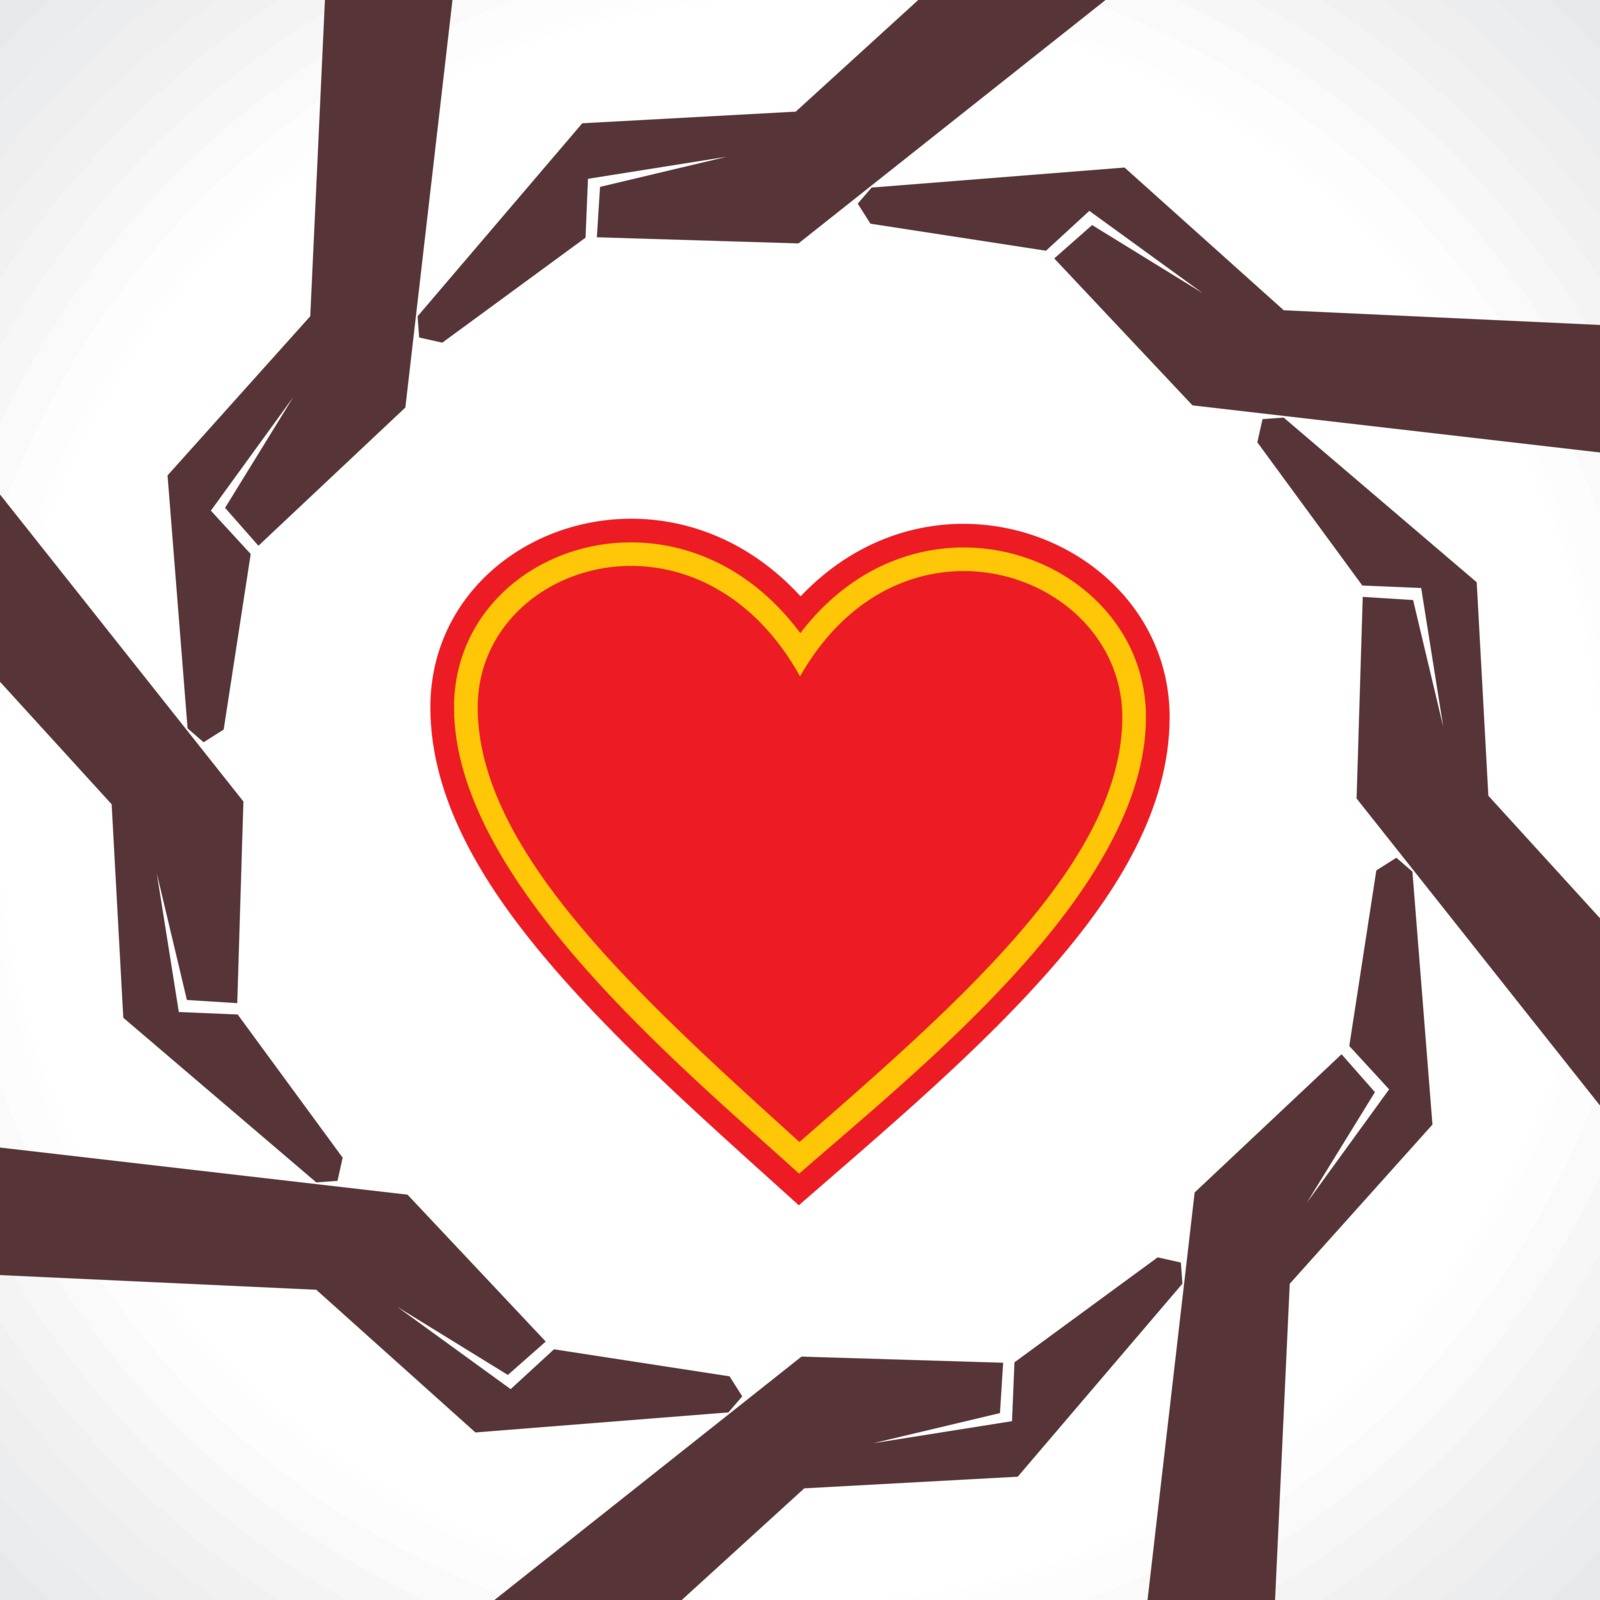 Protect human heart concept-vector illustration by graphicsdunia4you